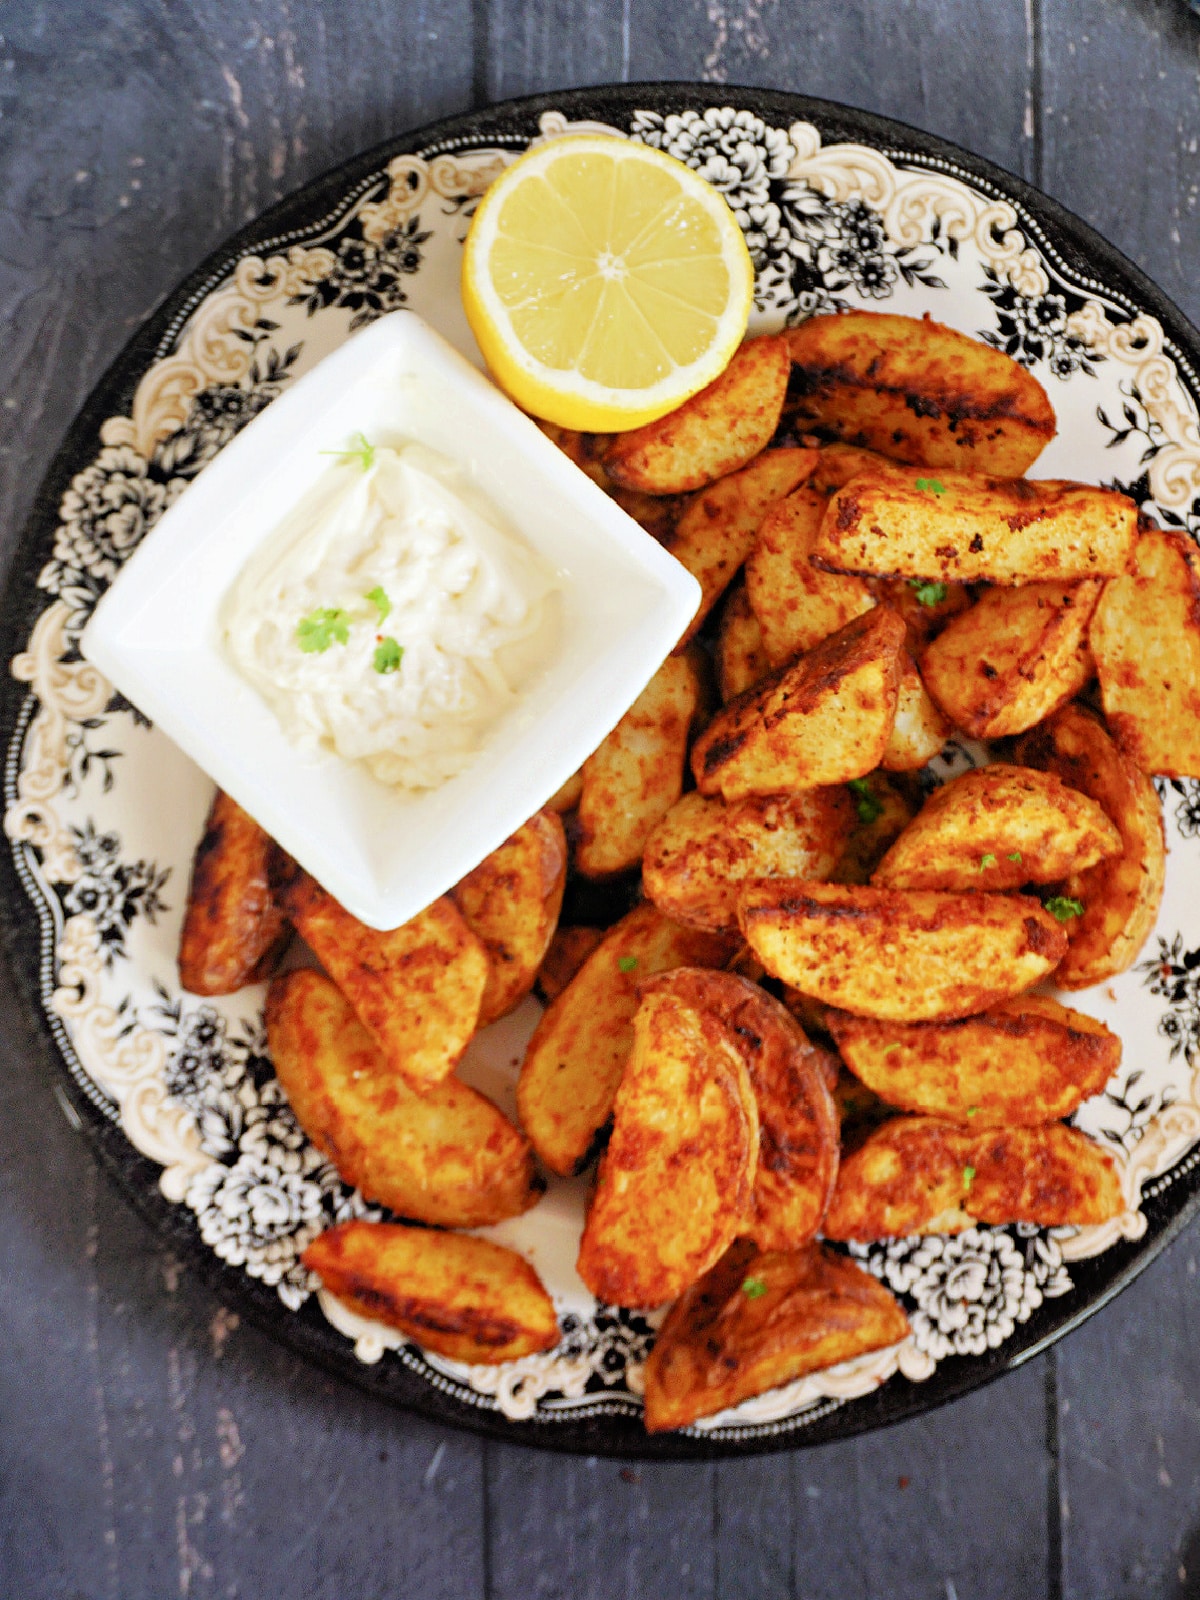 A plate with paprika potato wedges, half a lemon and a white small bowl with mayo